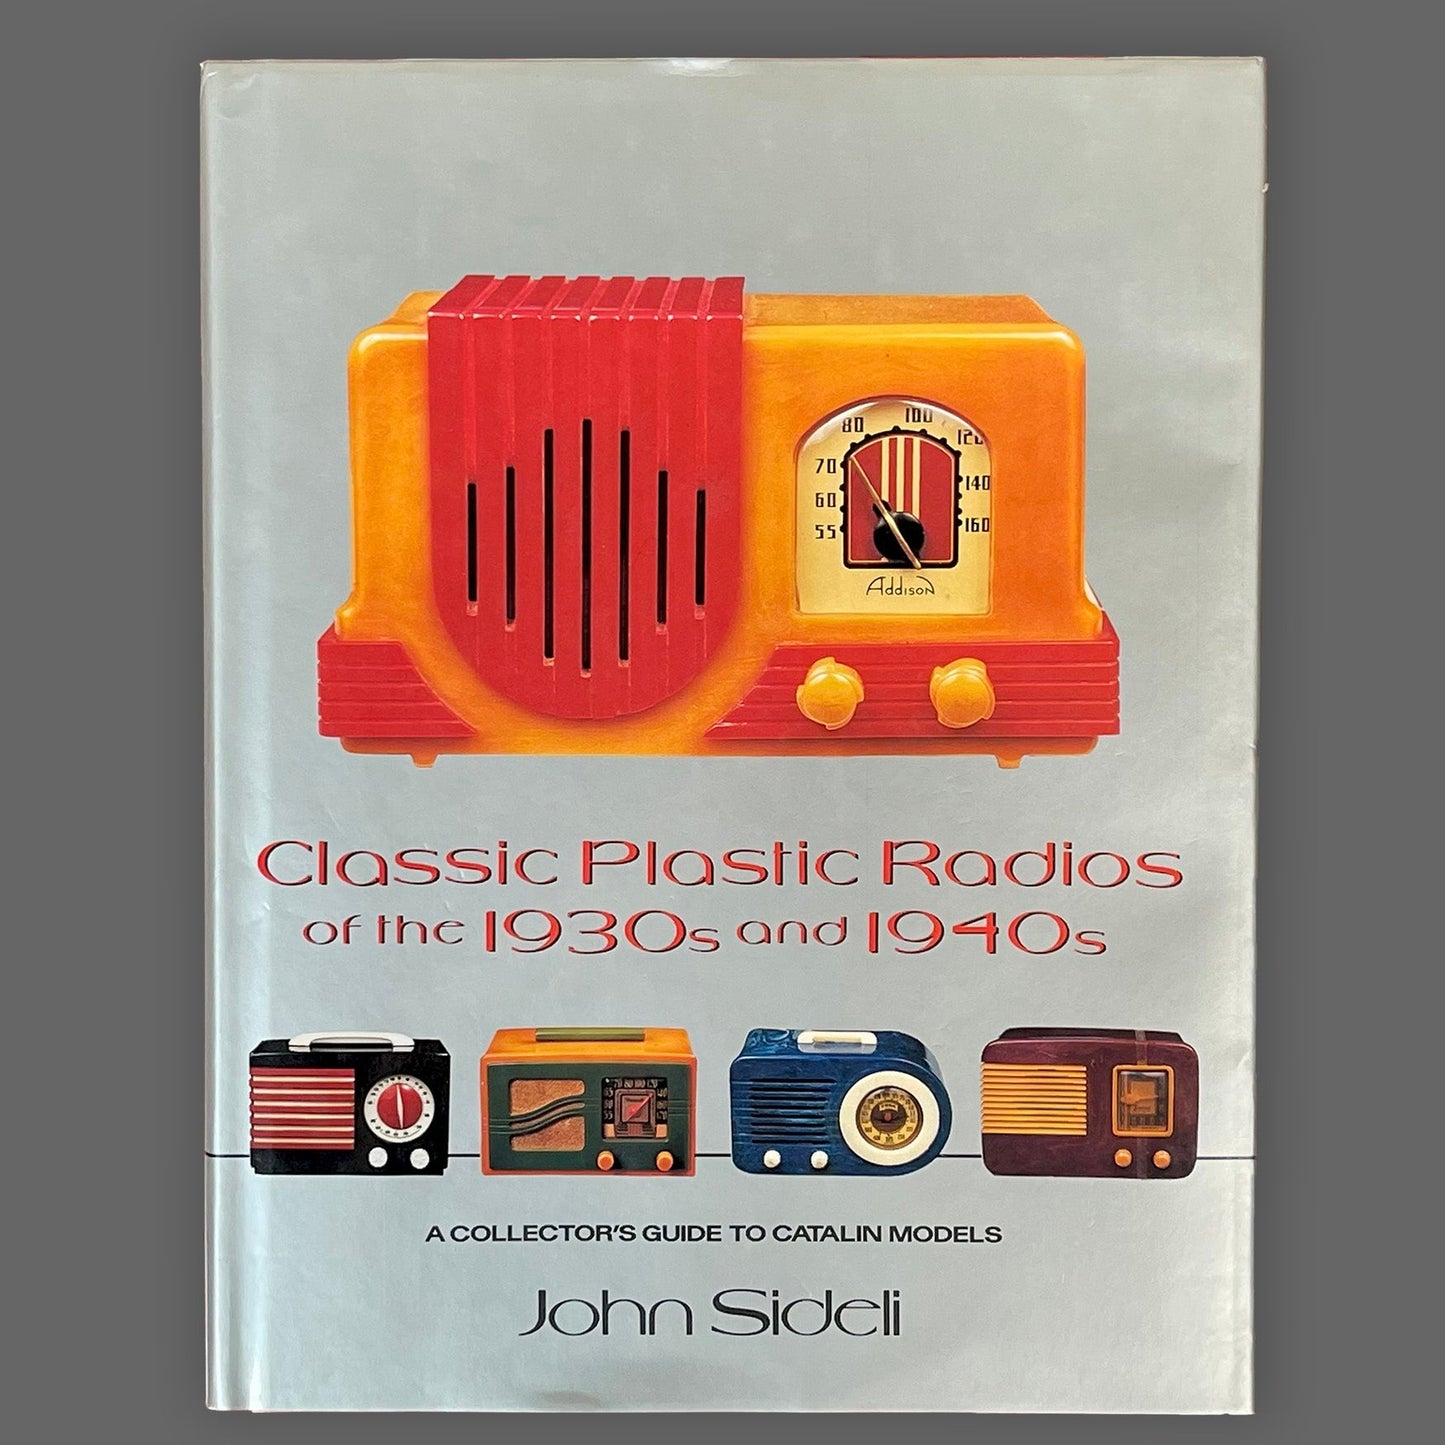 Classic Plastic Radios of the 1930s-40s Book by John Sideli- Hardcover (Used-Very Good)